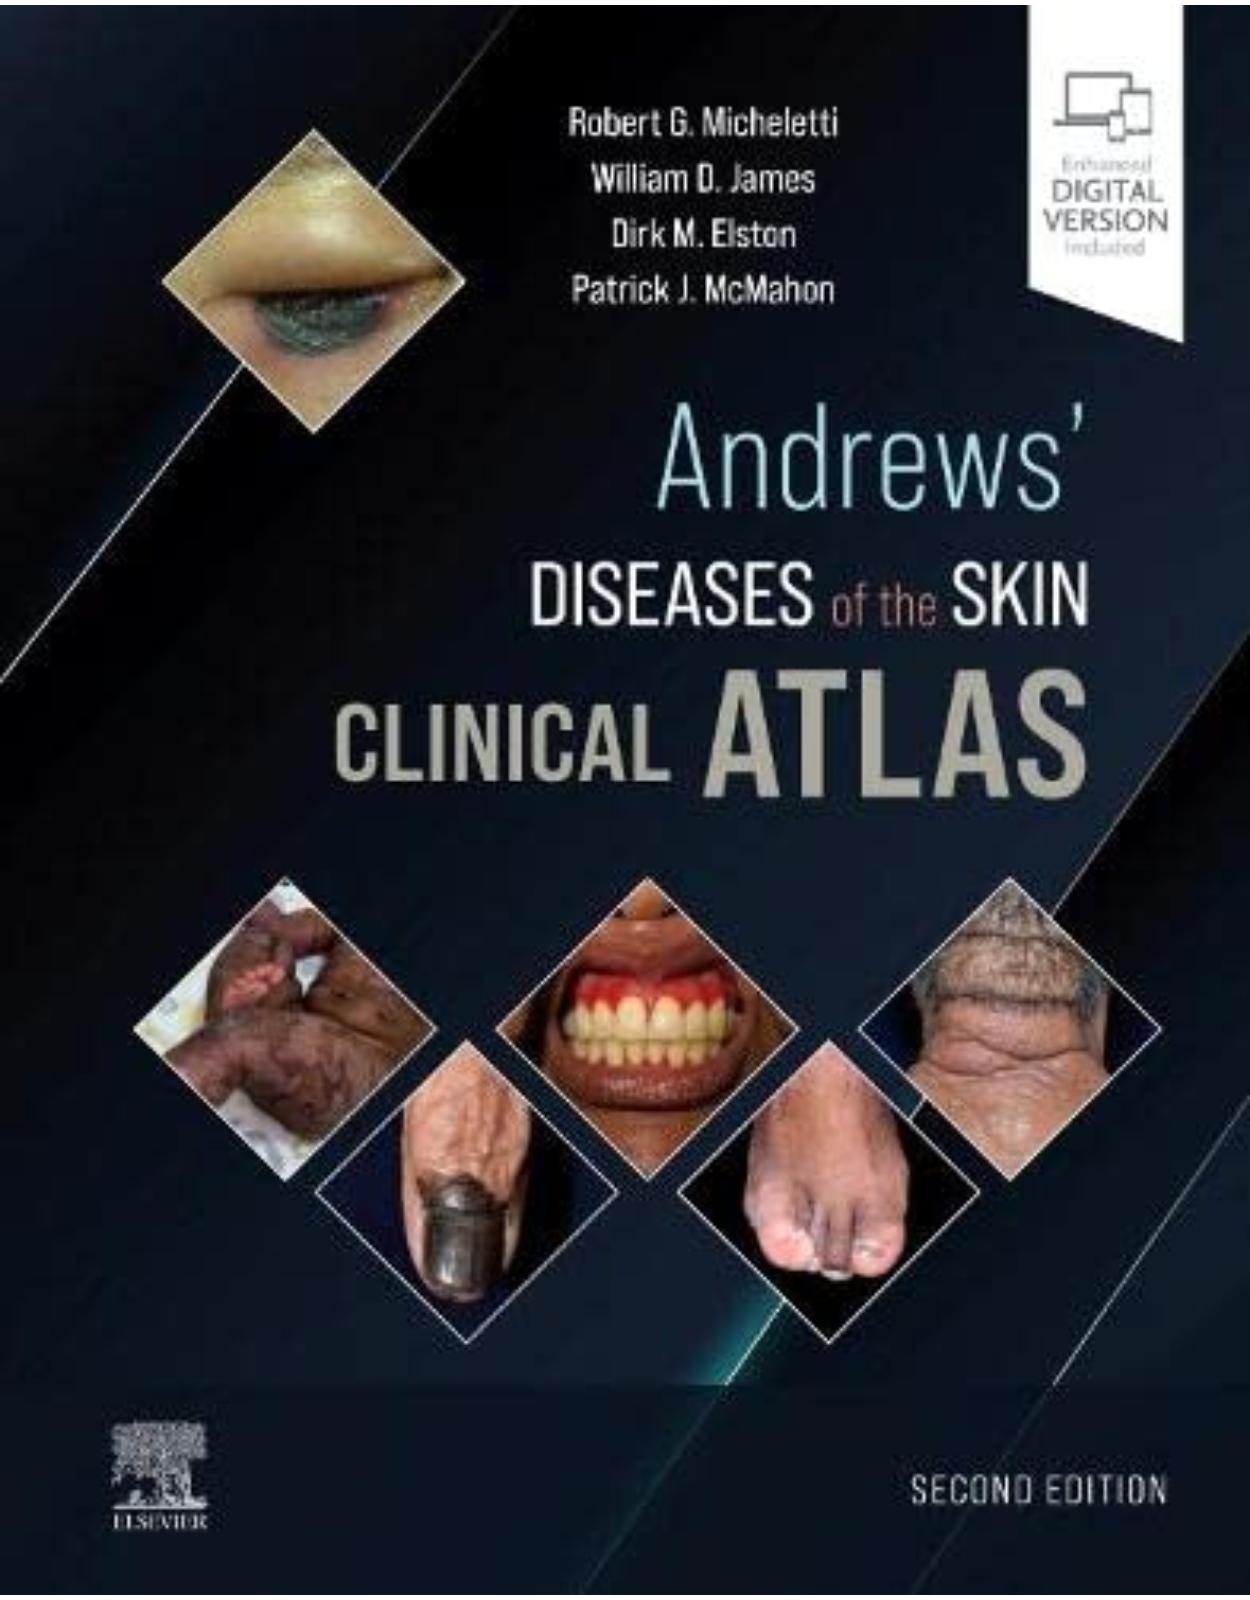 Andrews’ Diseases of the Skin Clinical Atlas